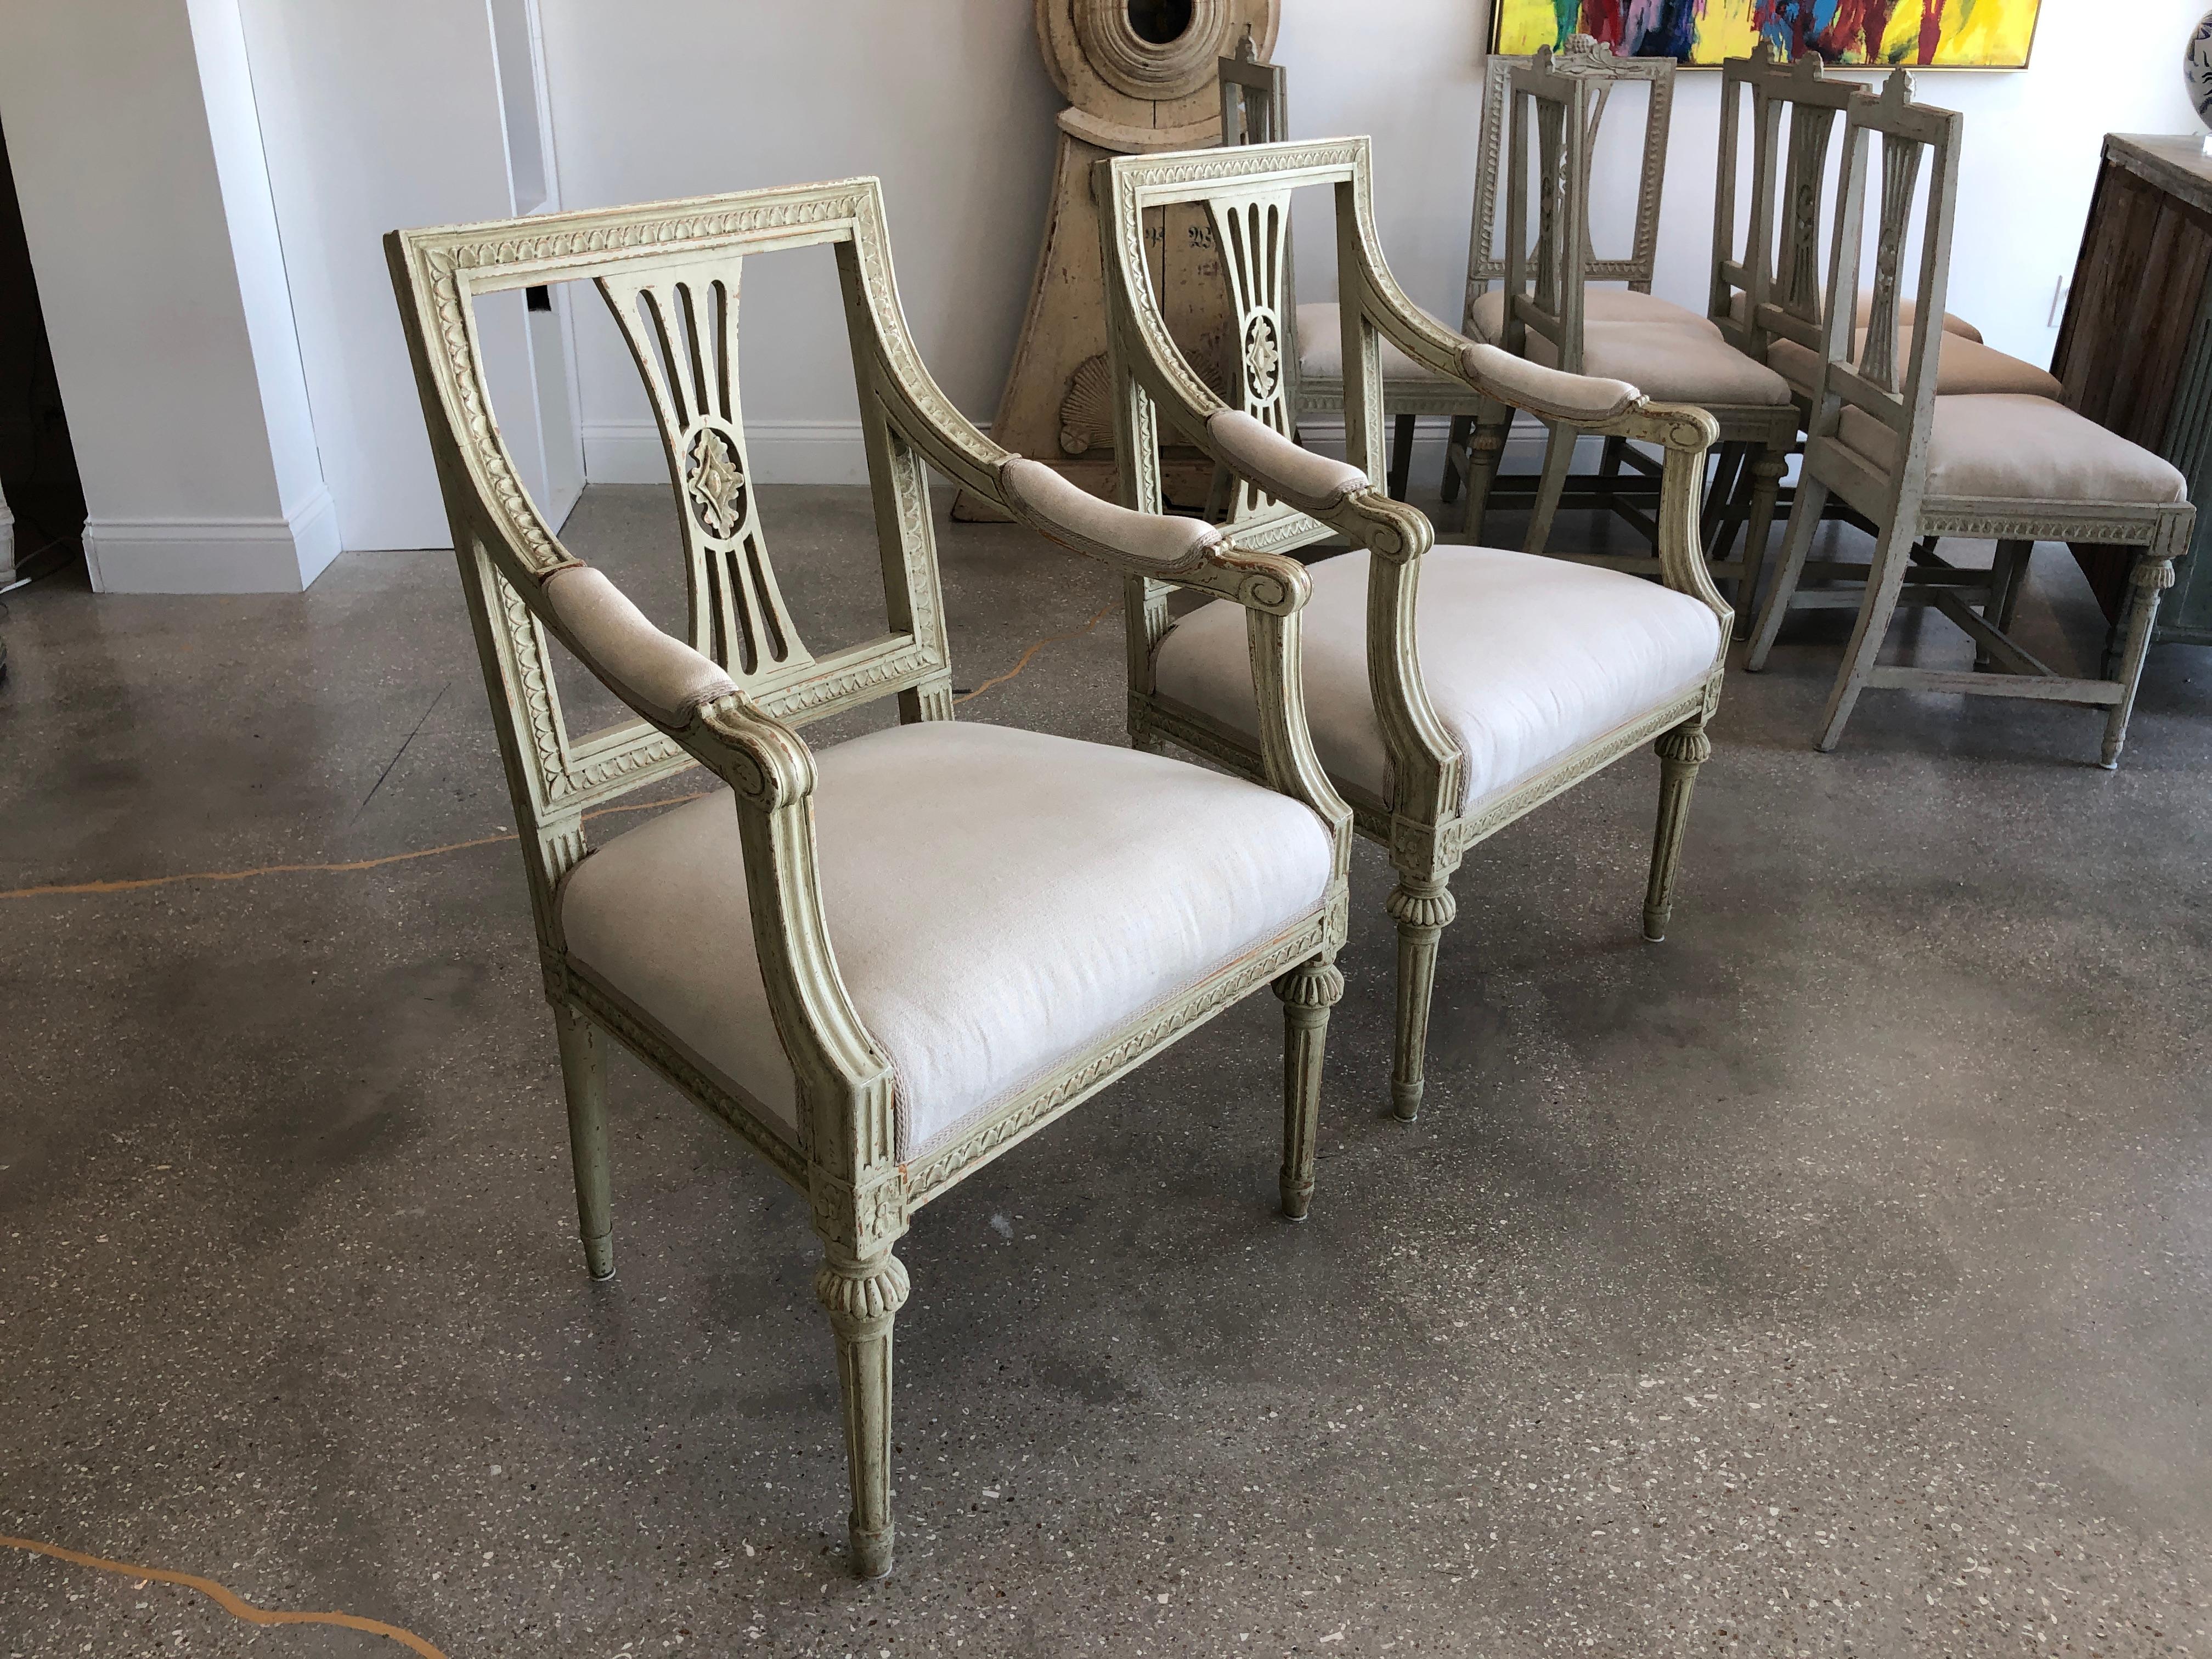 19th Century Pair of Antique Swedish Painted Gustavian Armchairs, circa 1810-1820 For Sale